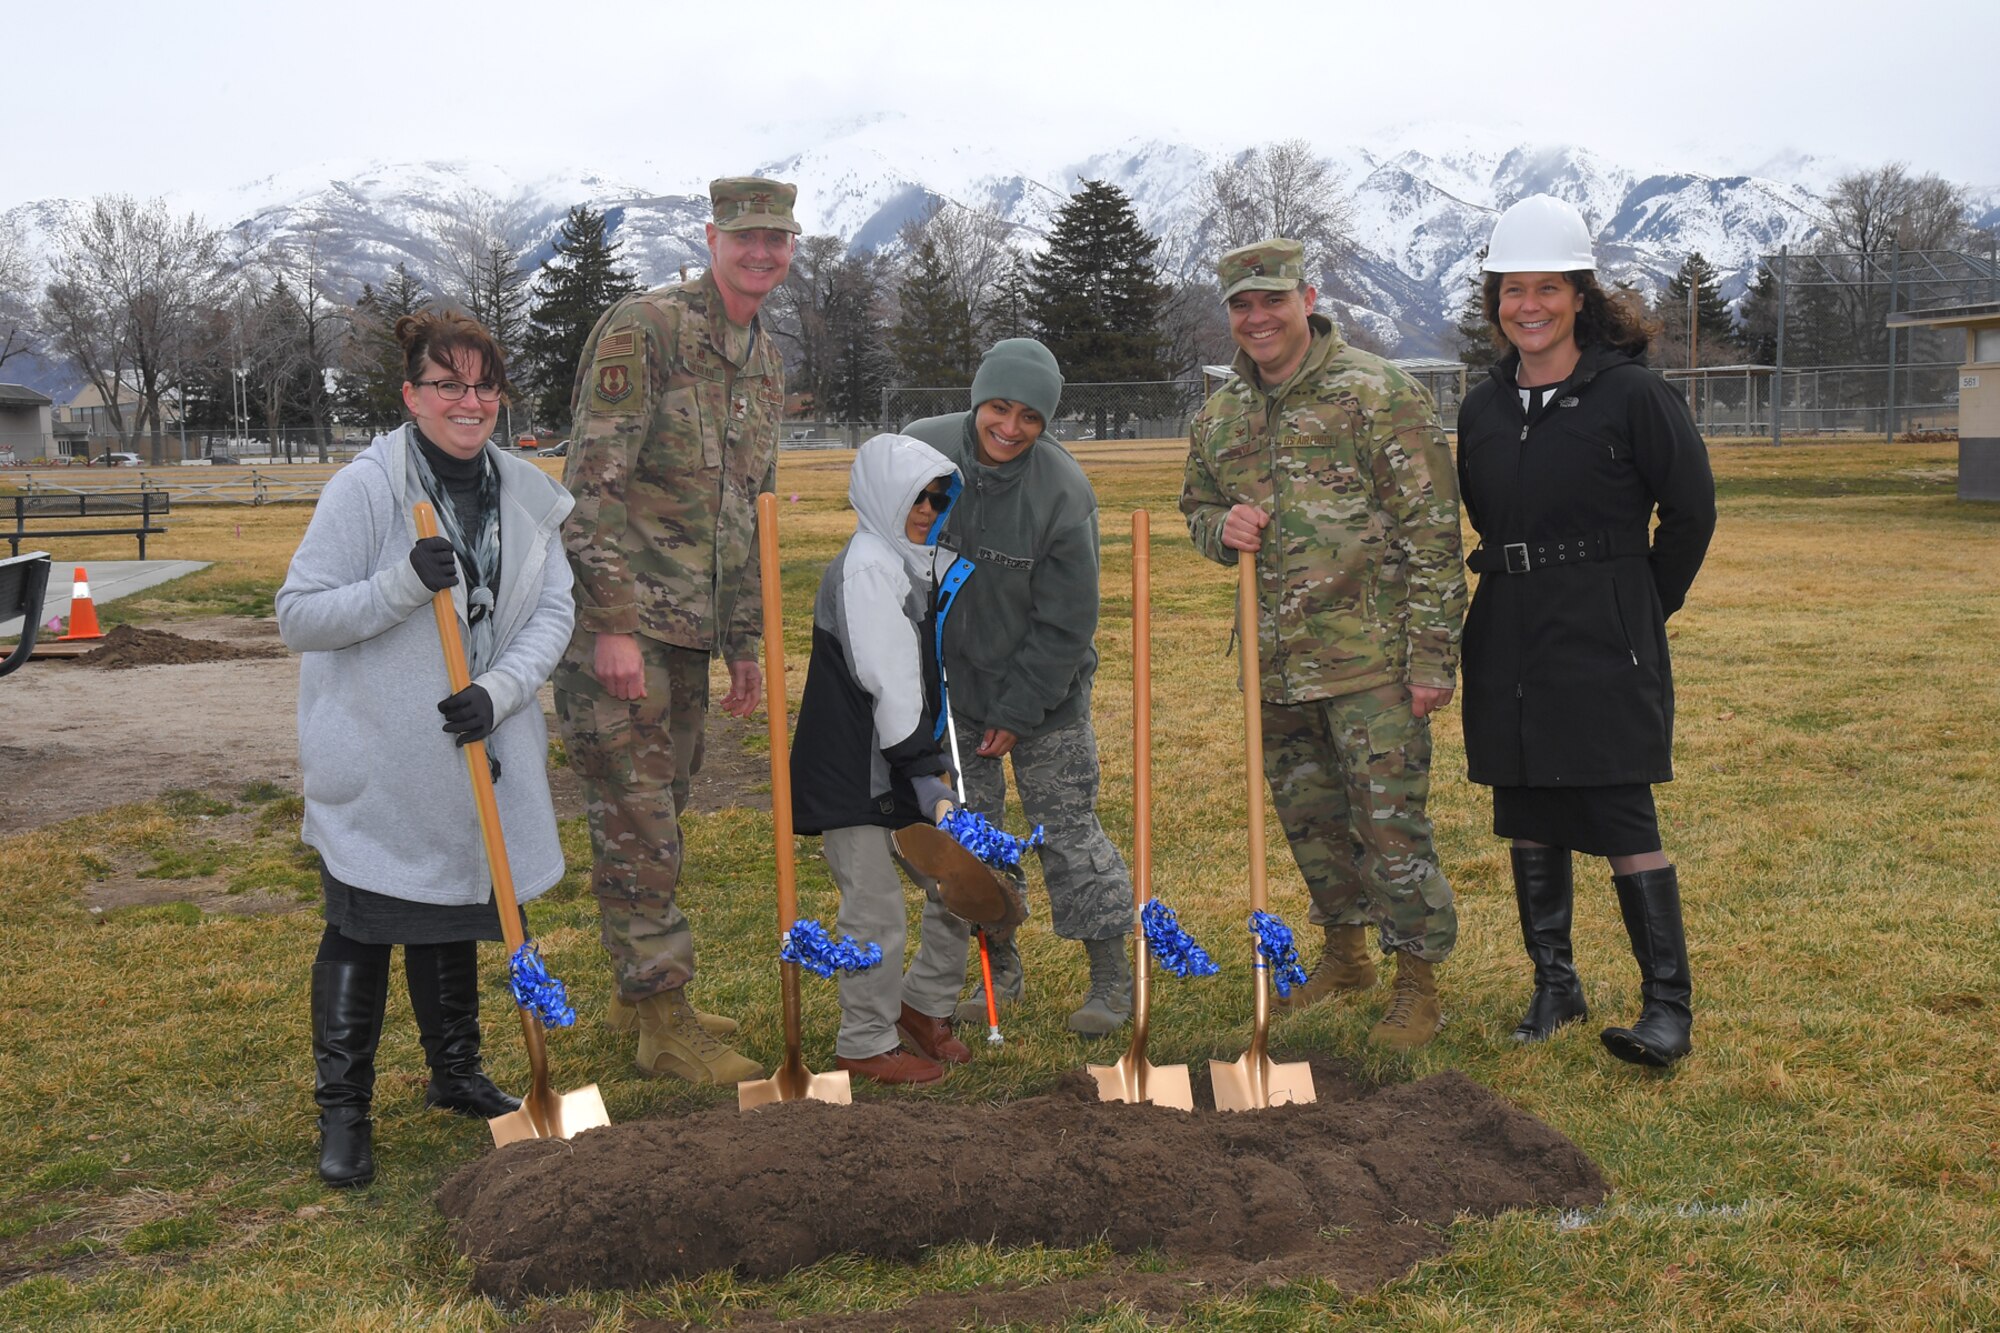 (Center) Keanu Clark and his mother, Tech. Sgt. Elentra Suafoa, 388th Fighter Wing, participate in a ground breaking for an all abilities playground March 21, 2019, at Hill Air Force Base, Utah. The playground will remove barriers of exclusion, both physical and social, and provide a sensory rich experience for children of all abilities. Playground completion is planned for June 2019. Also participating, (left to right) Tammy Custer, Exceptional Family Member Program specialist, Col. Jon Eberlan, 75th Air Base Wing commander, Col. Gabe Lopez, 75th Mission Support Group commander, and Ali Seligman, EFMP specialist. (U.S. Air Force photo by Todd Cromar)